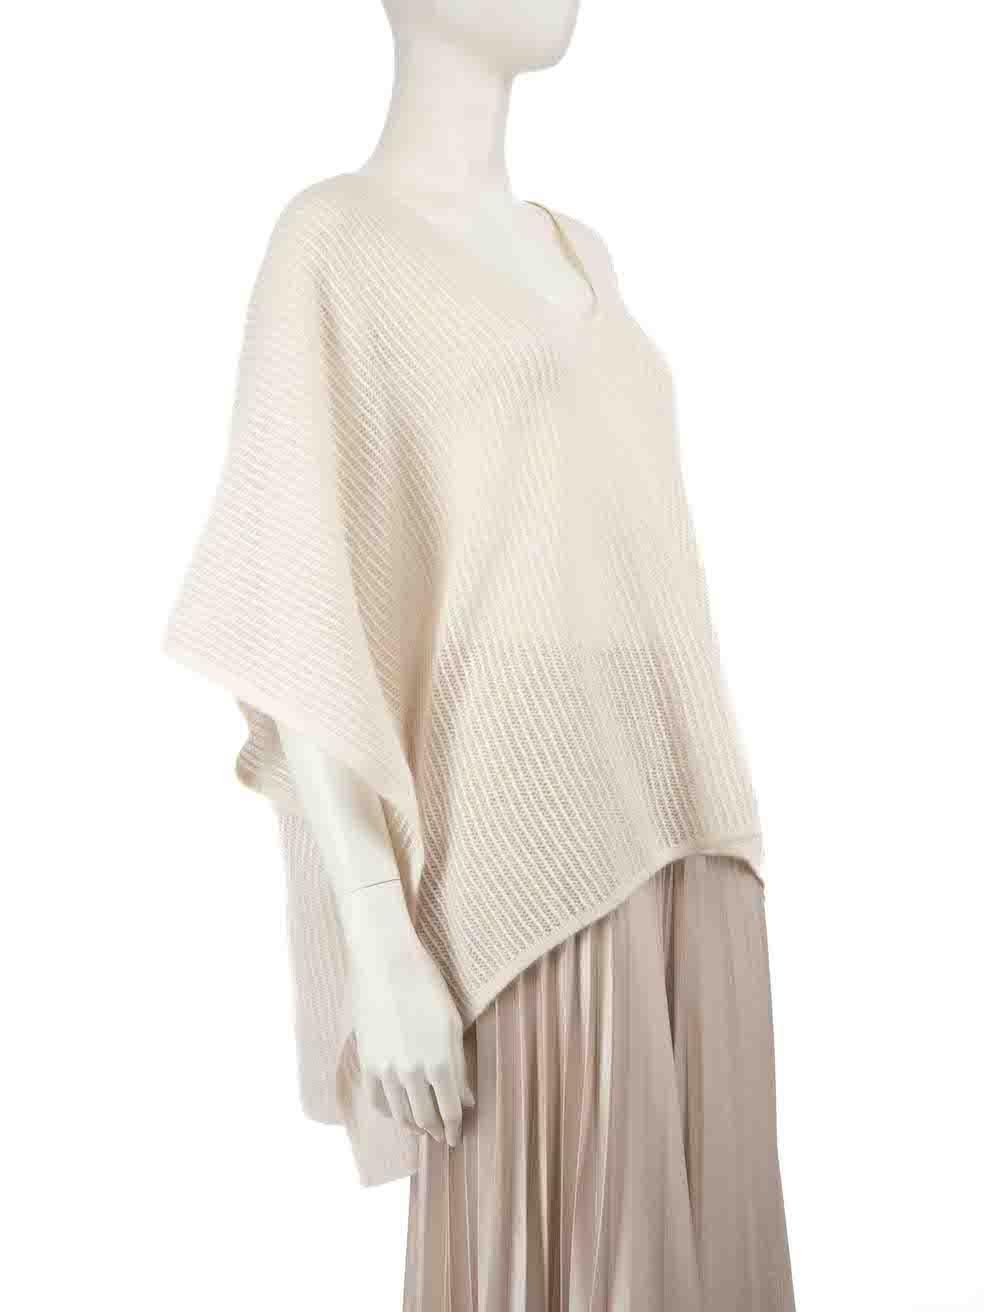 CONDITION is Very good. Hardly any visible wear to knit is evident on this used 360 Cashmere designer resale item. Composition label is missing.
 
 
 
 Details
 
 
 Ecru
 
 Cashmere
 
 Knit poncho
 
 Mid length sleeves
 
 V-neck
 
 Sheer
 
